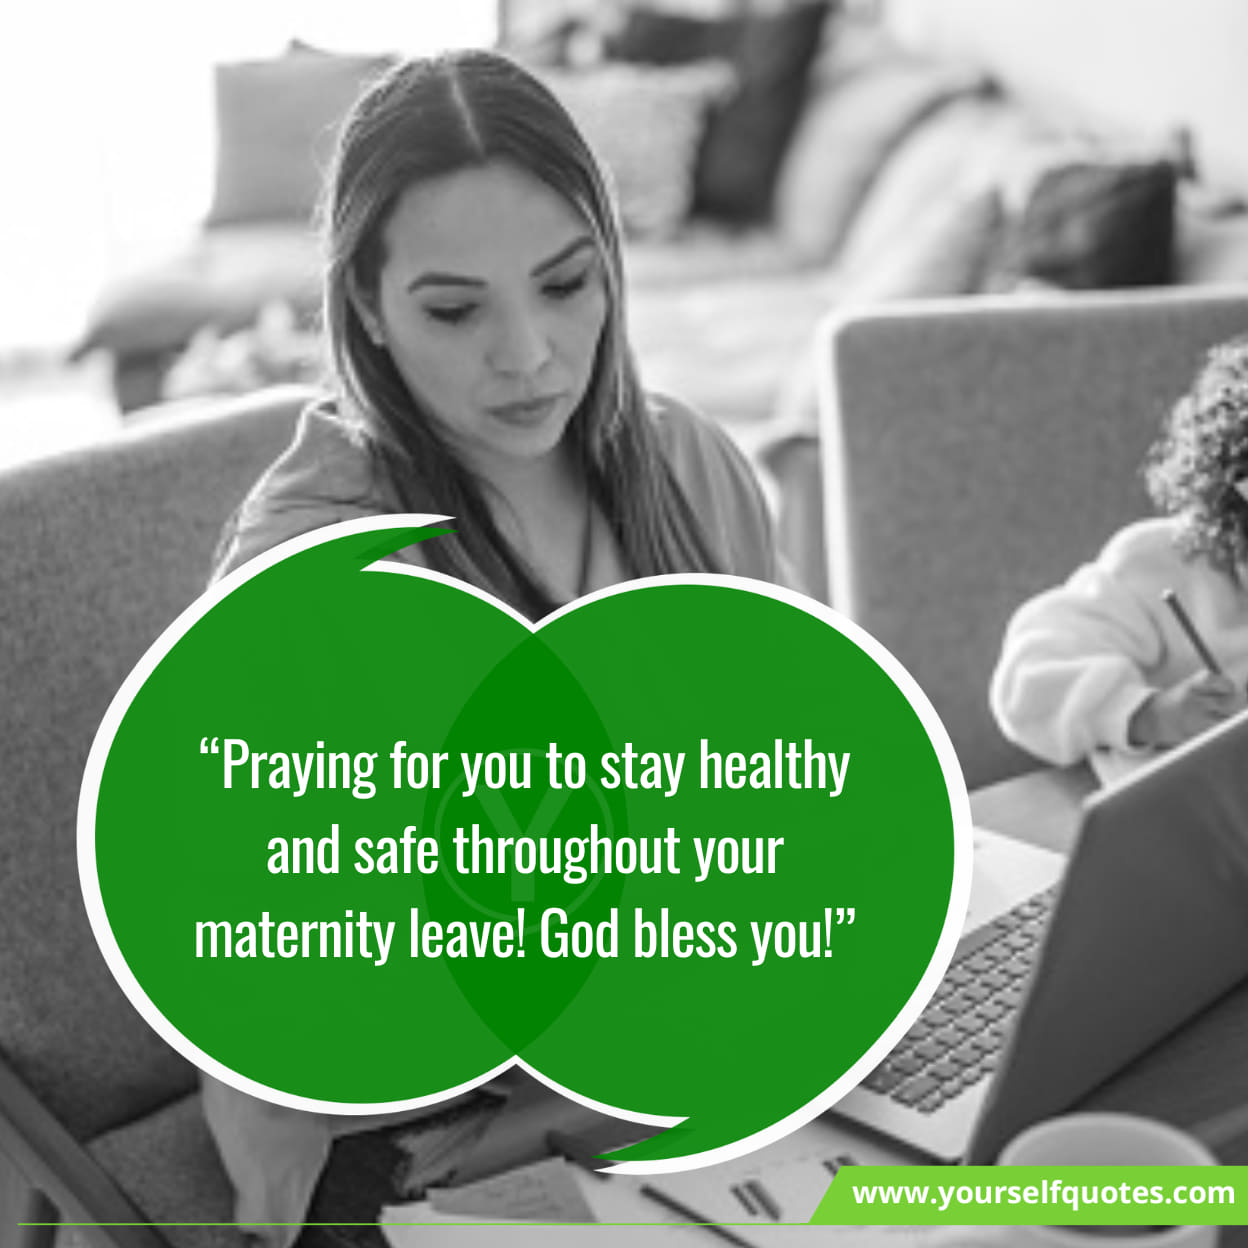 Inspiring Maternity Leave Messages for Your Colleague